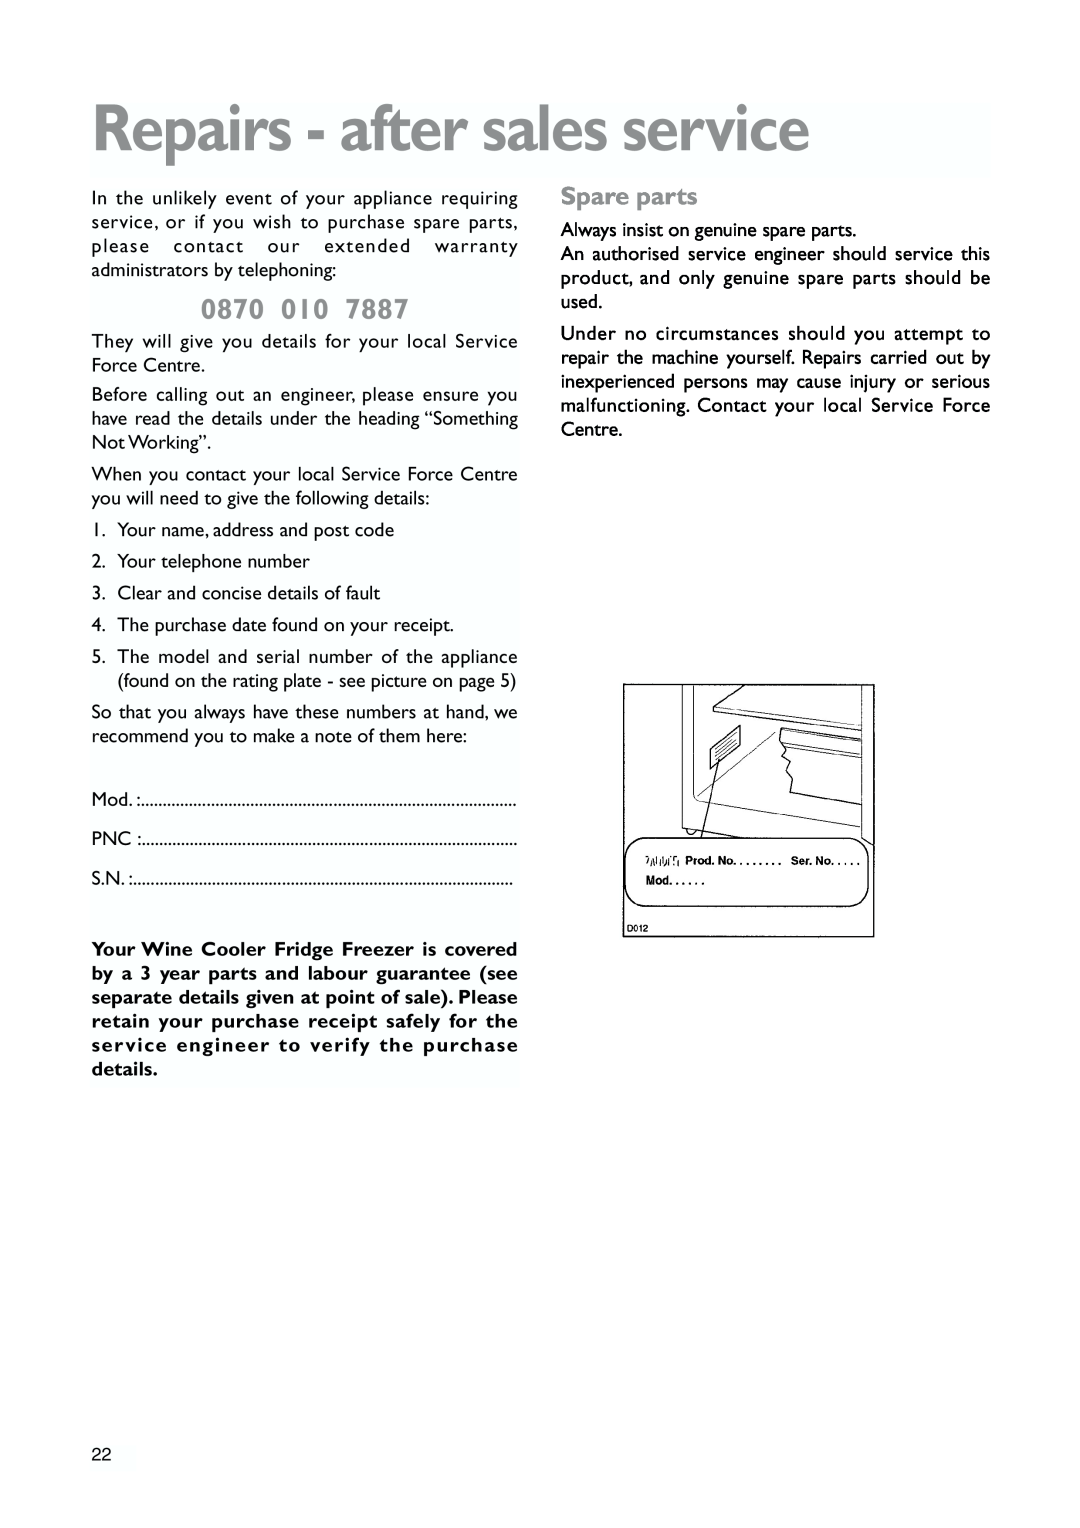 John Lewis JLWFF1101 instruction manual Repairs - after sales service, 0870 010, Spare parts 